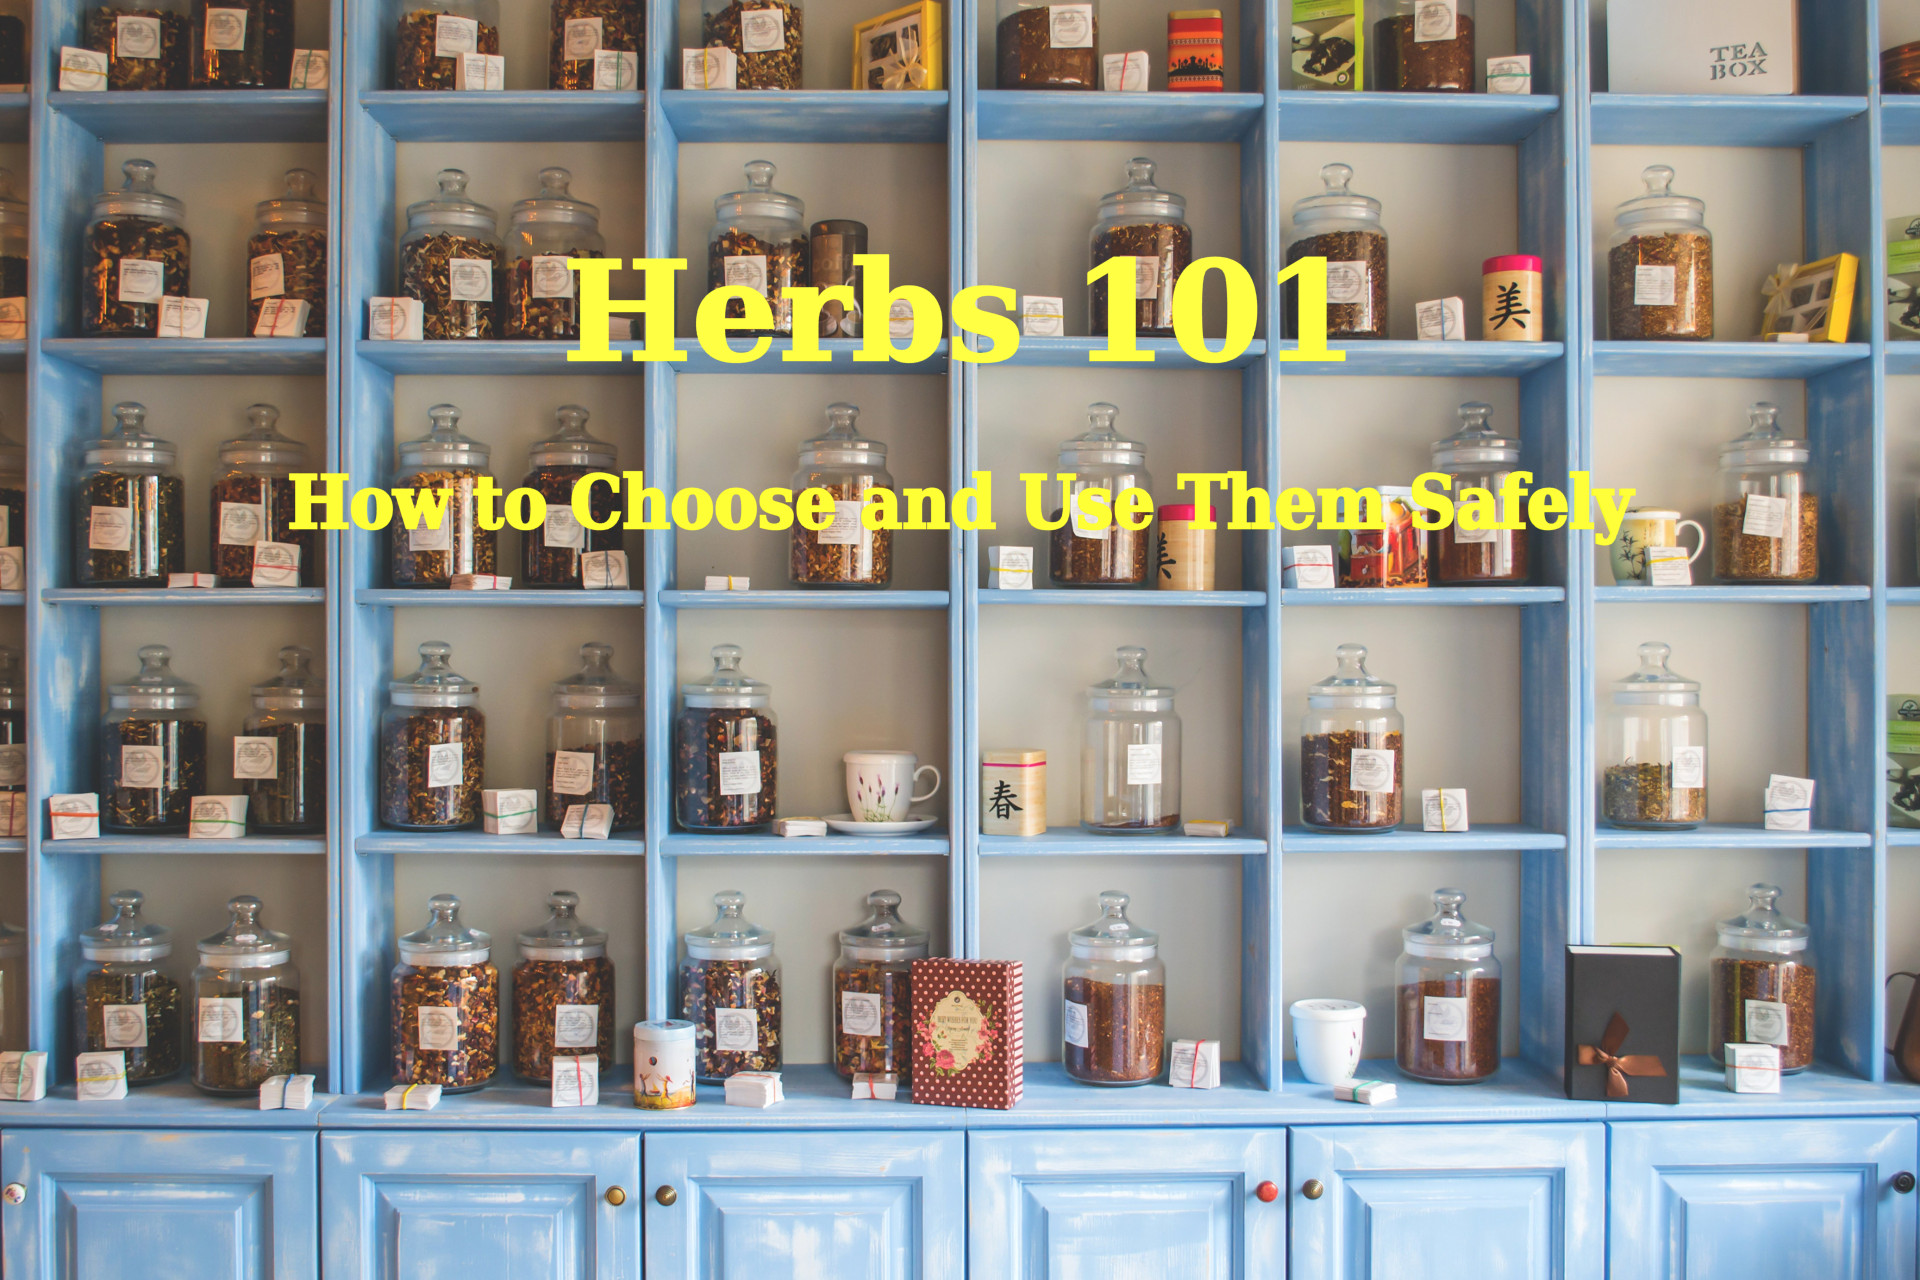 Herbs 101: How to Select and Use Herbs Safely (video)